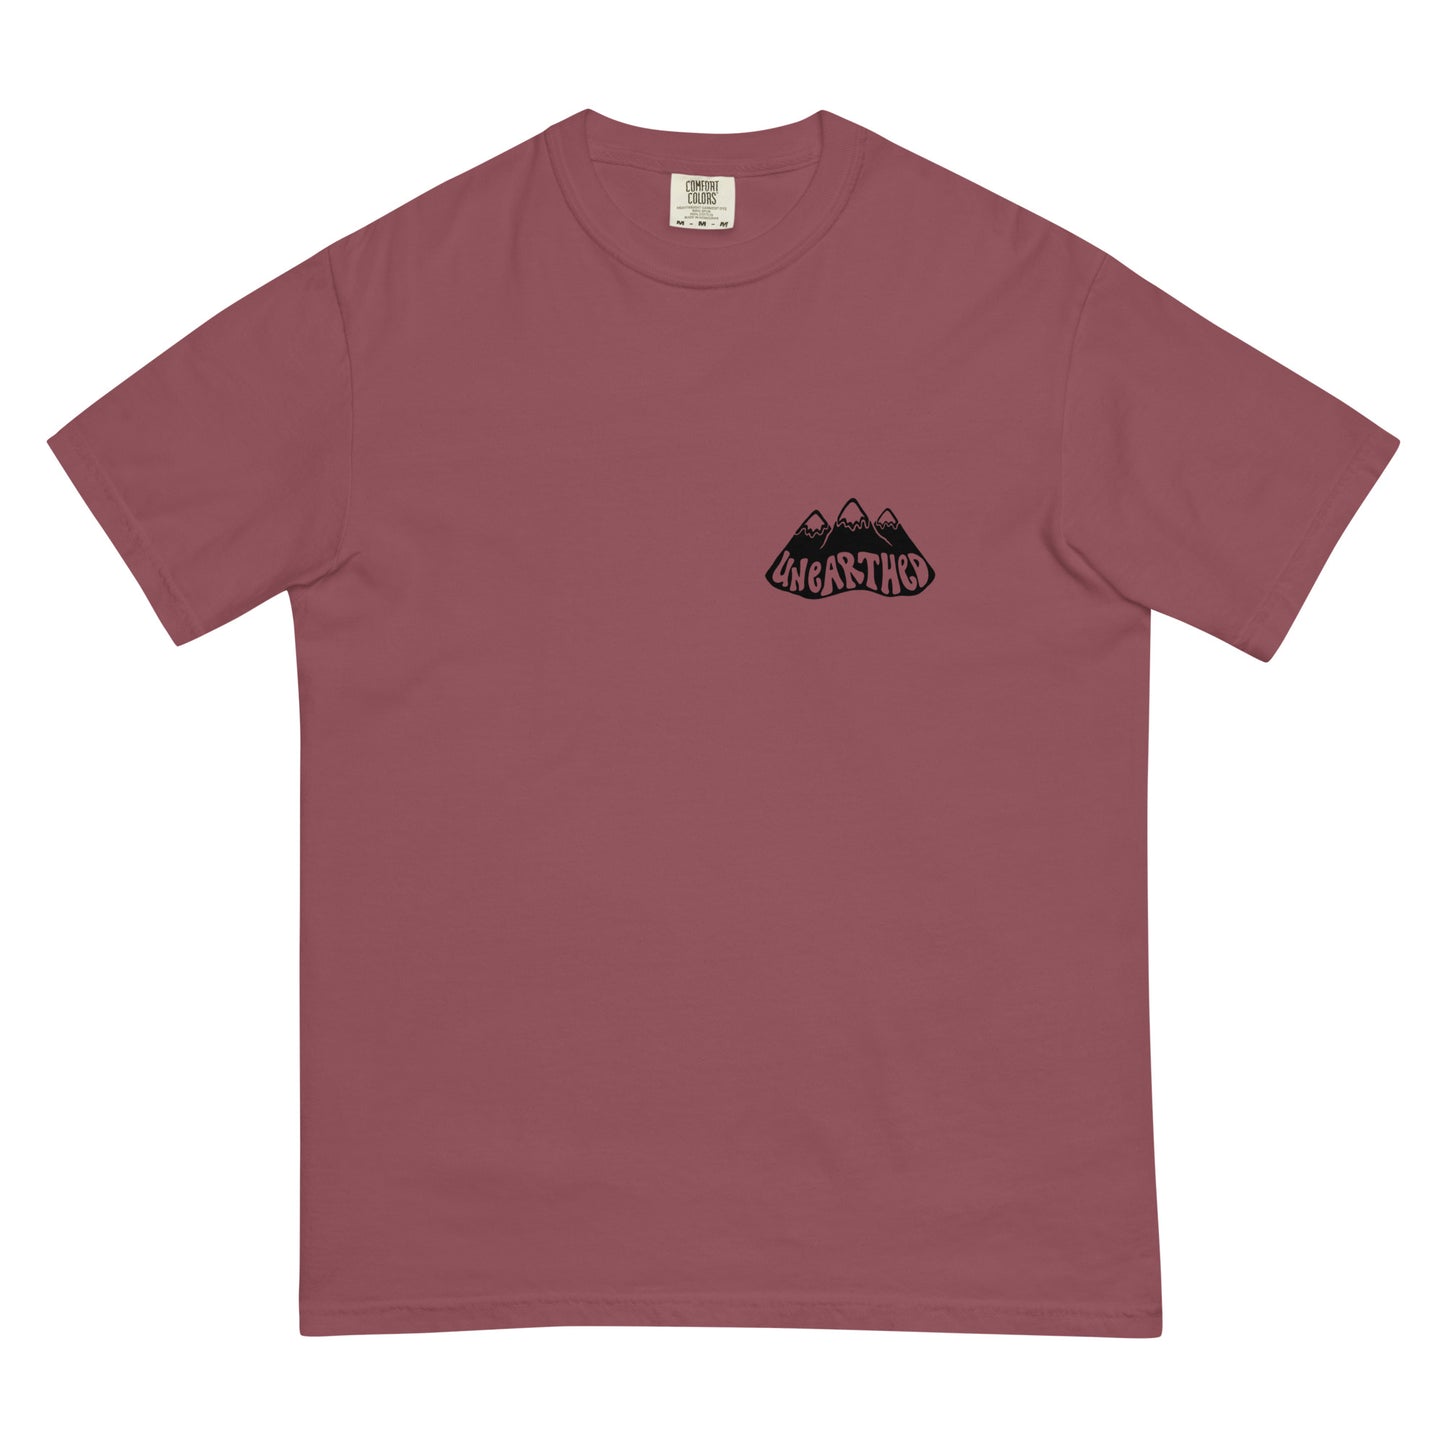 unearthed mountains garment-dyed heavyweight t-shirt